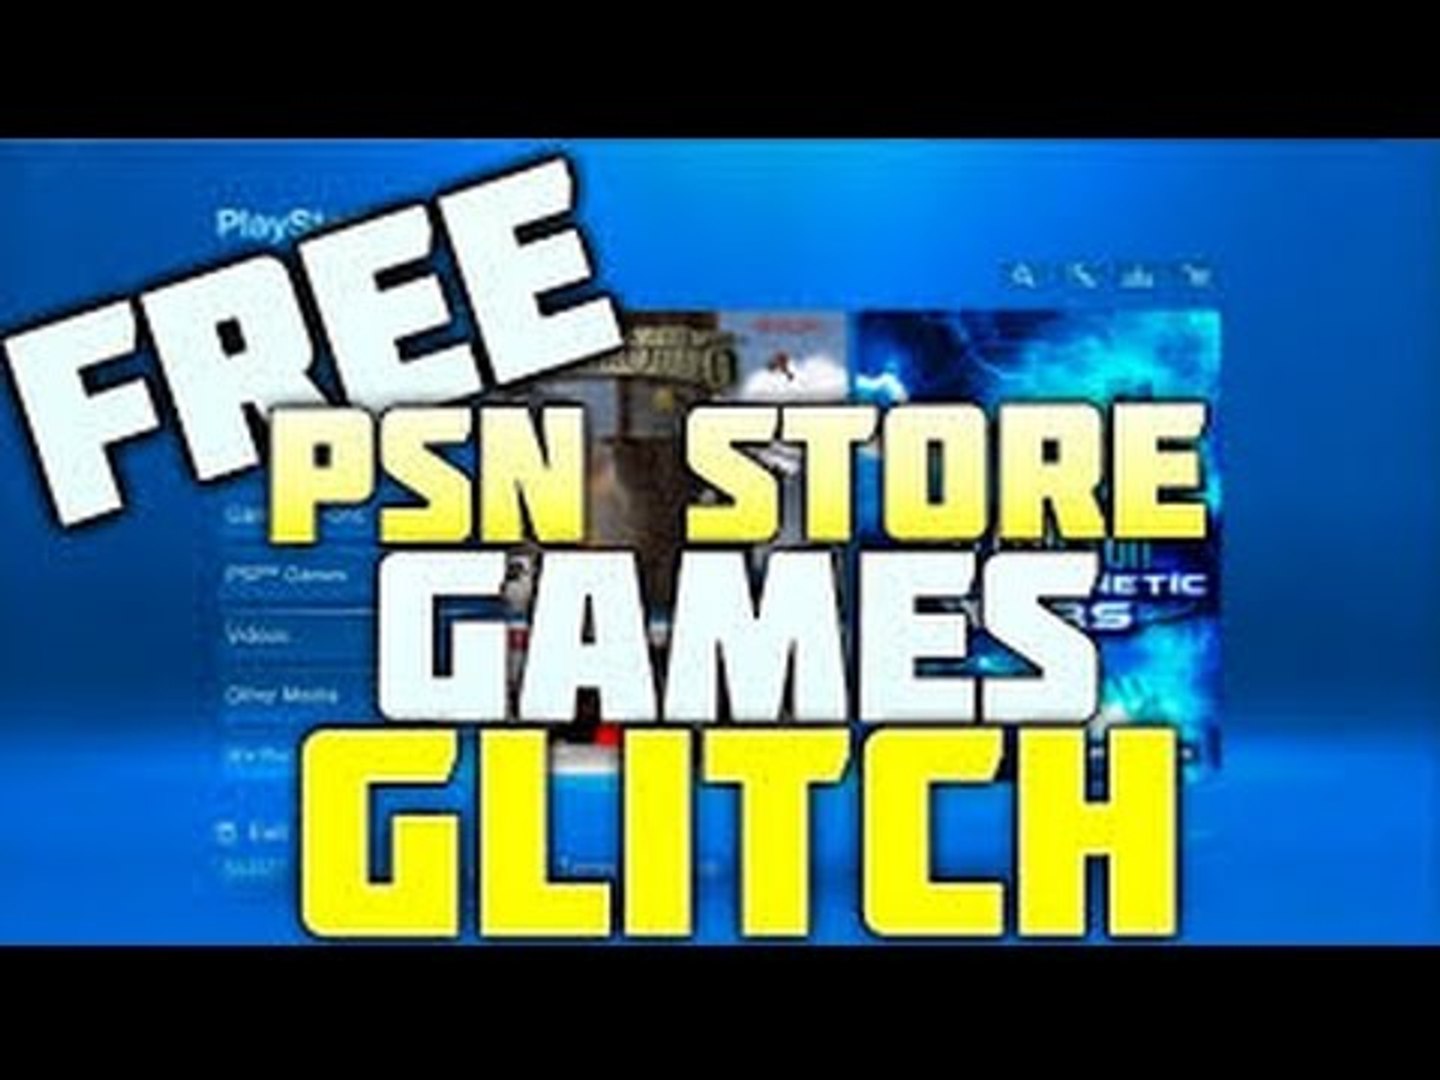 City access Go through How to Get Free PS3 Games From Playstation Store-Glitch - video Dailymotion